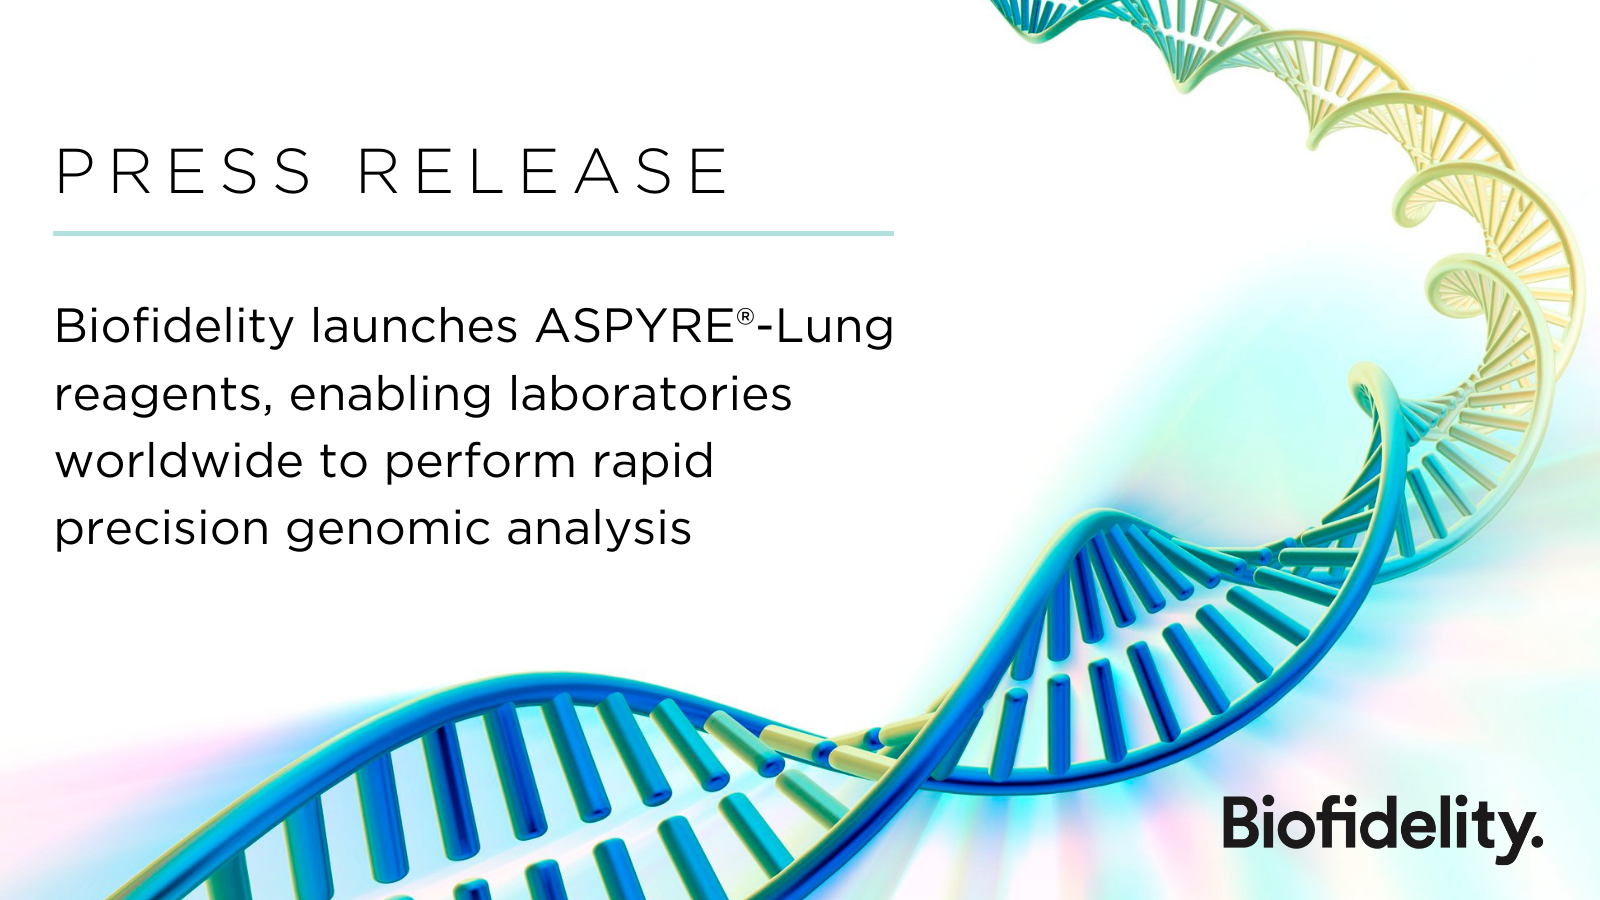 Biofidelity launches ASPYRE®-Lung reagents, enabling laboratories worldwide to perform rapid precision genomic analysis